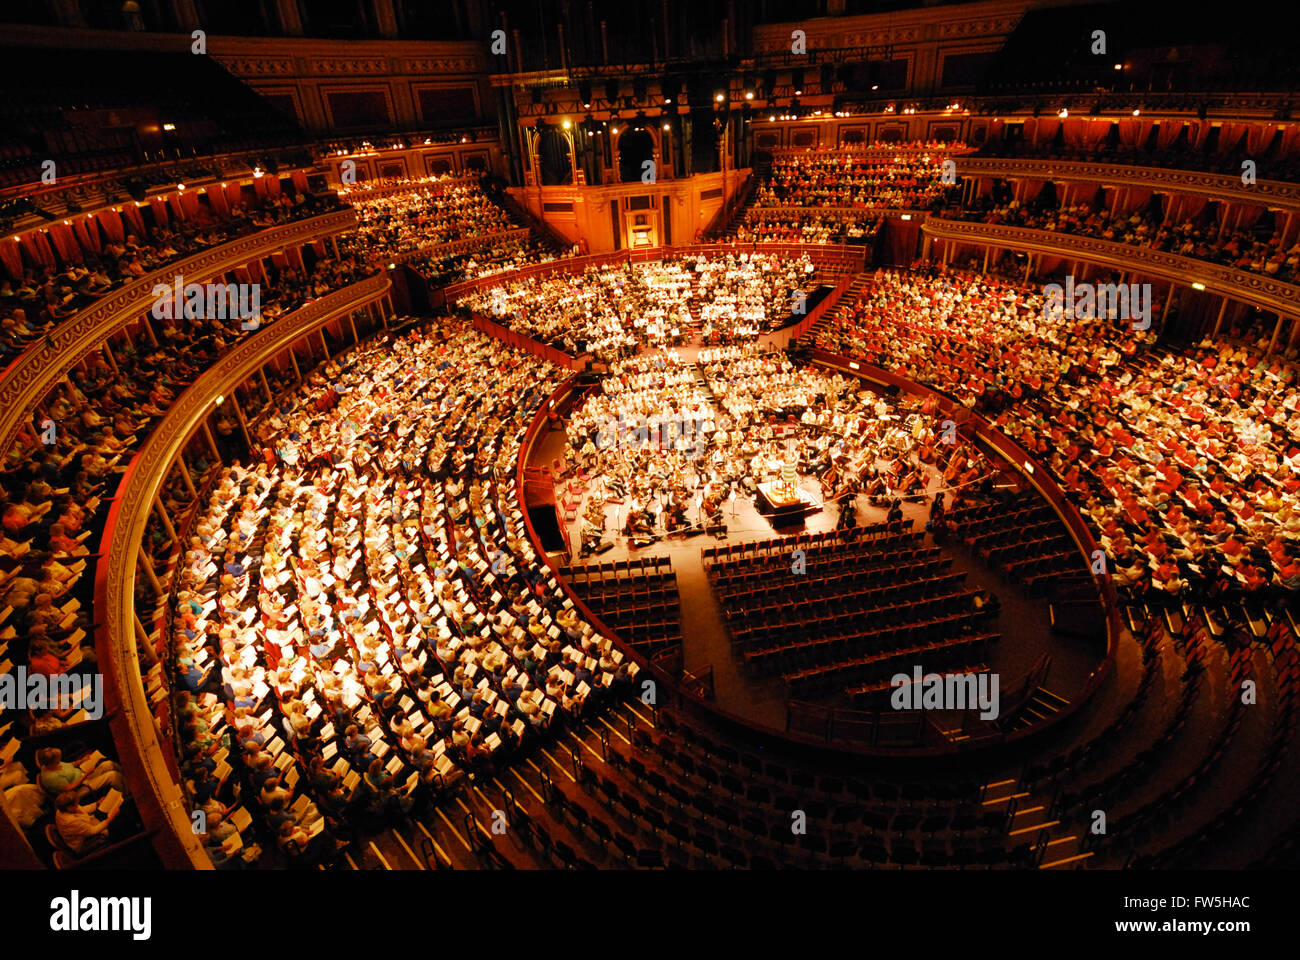 The Really Big Chorus Royal Albert Hall, rehearsing for Concerts from